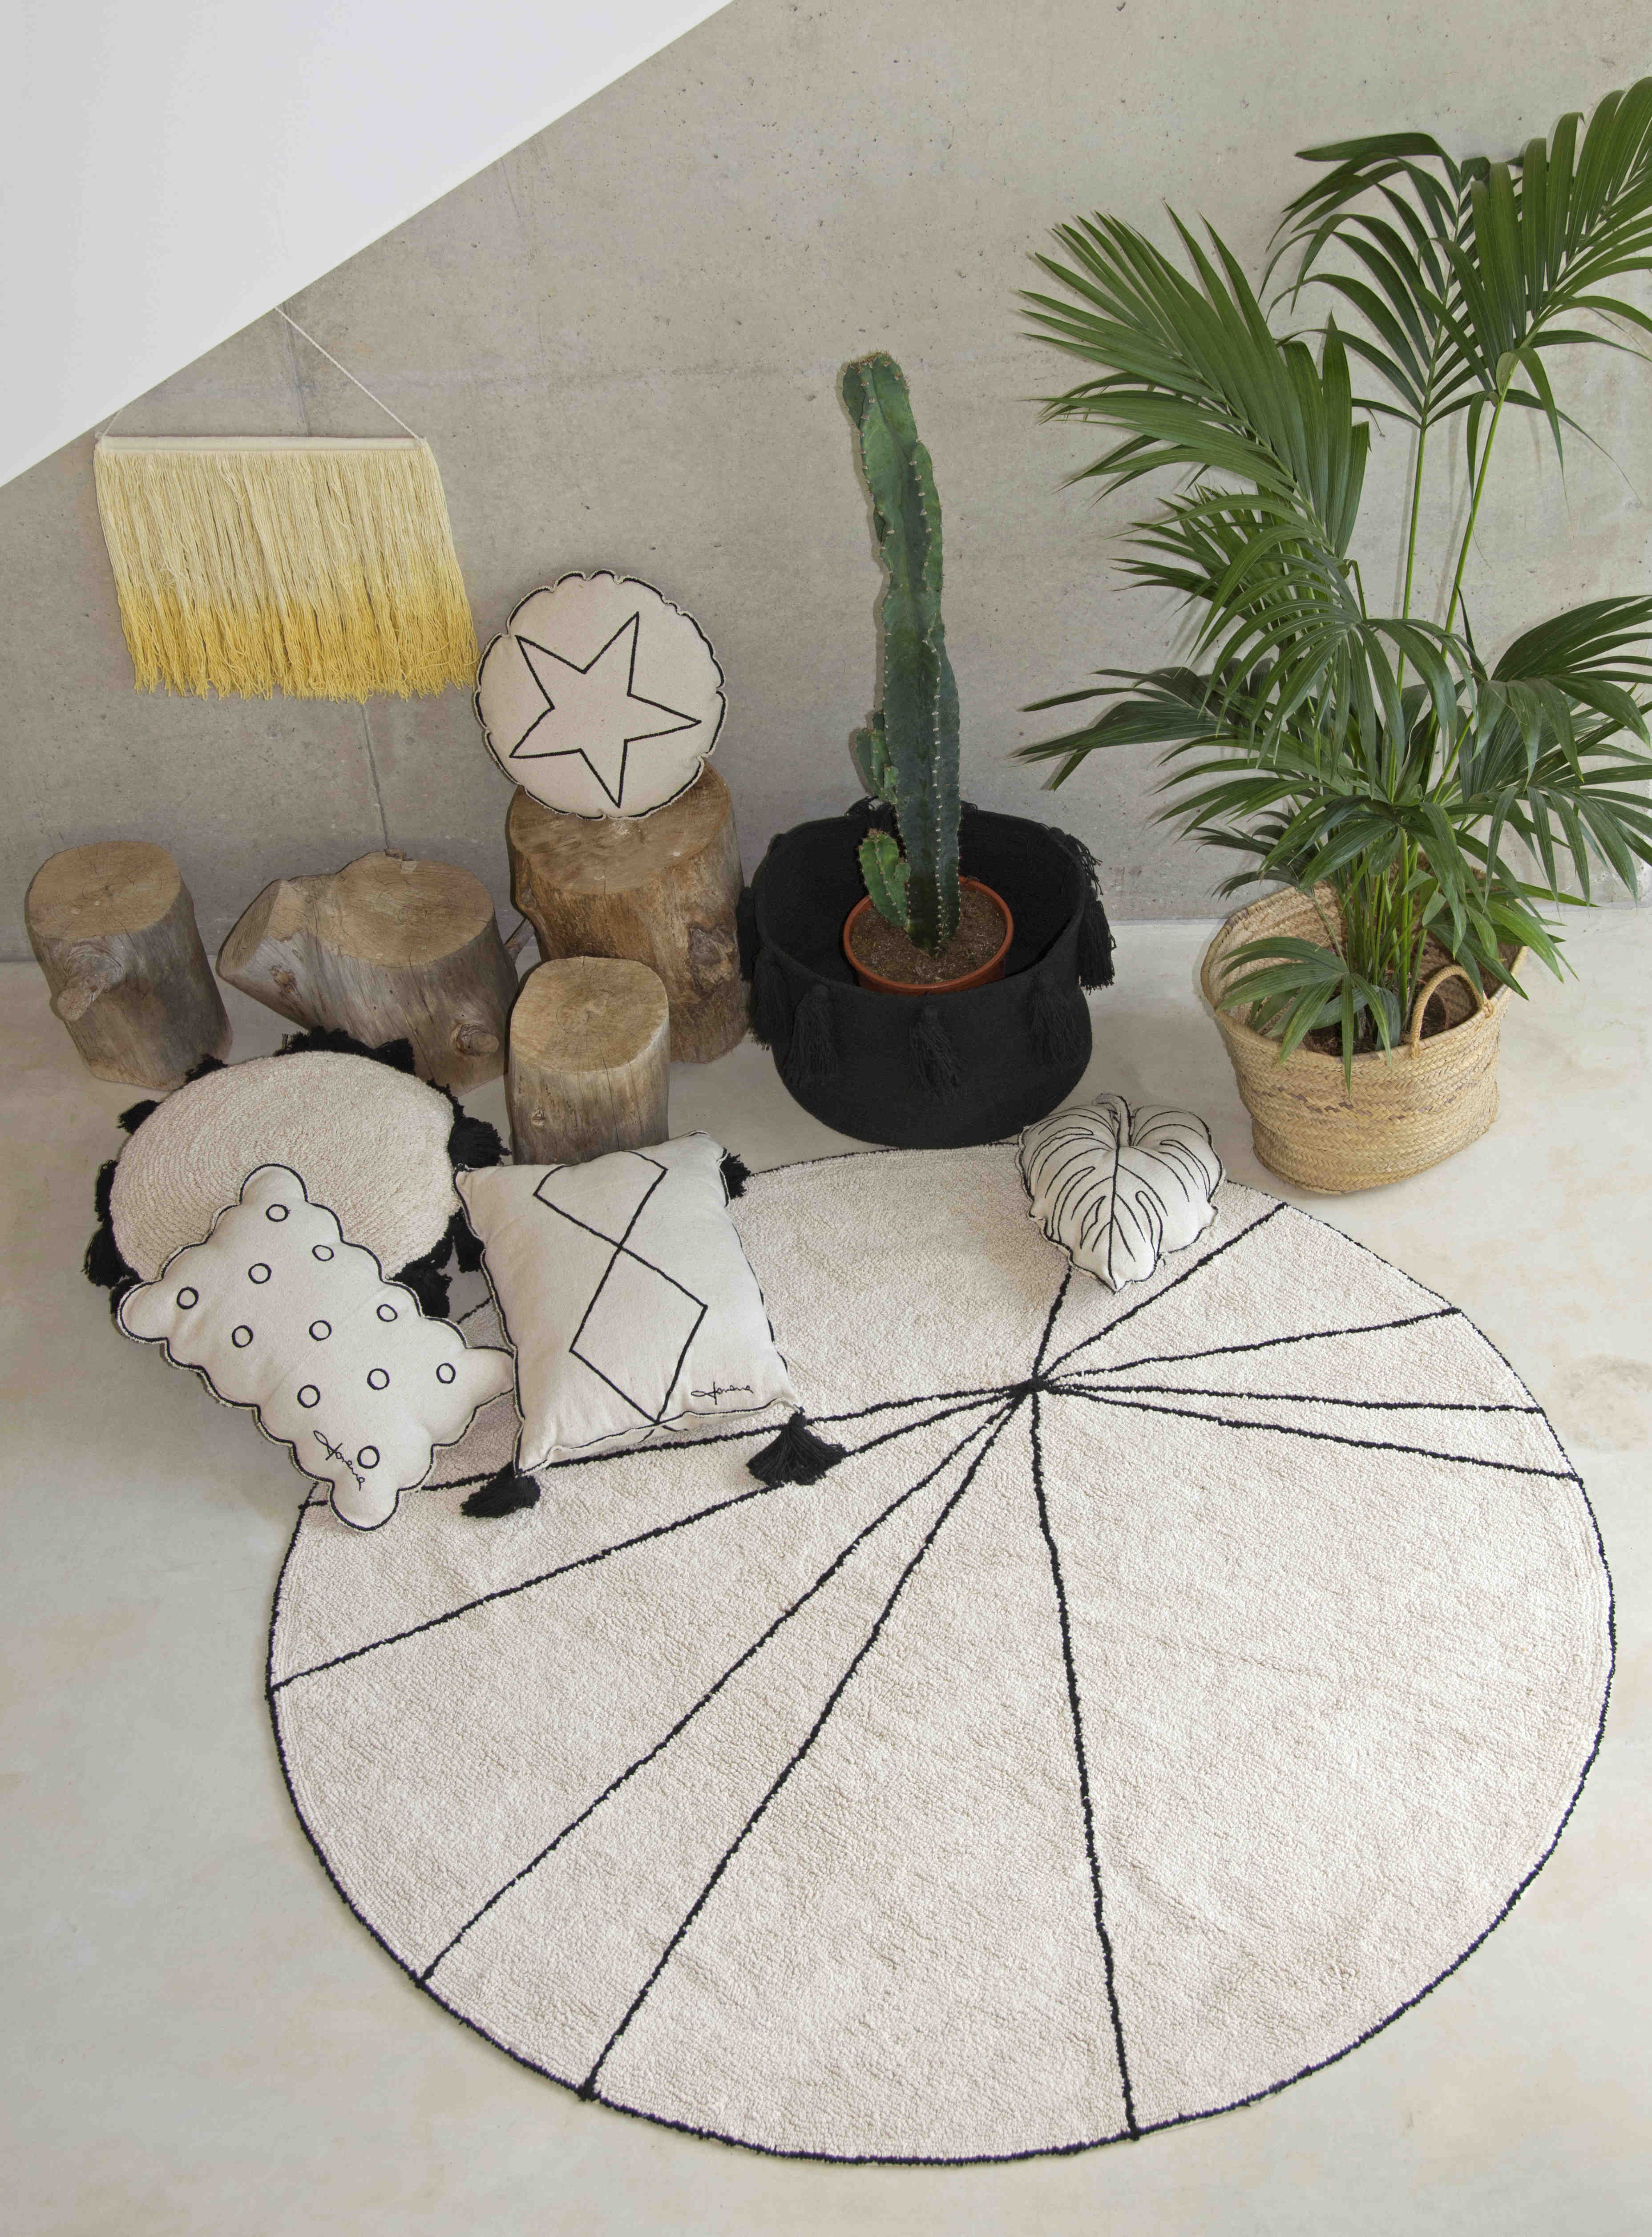 A circular shaped beige cotton rug decorated with geometric black lines